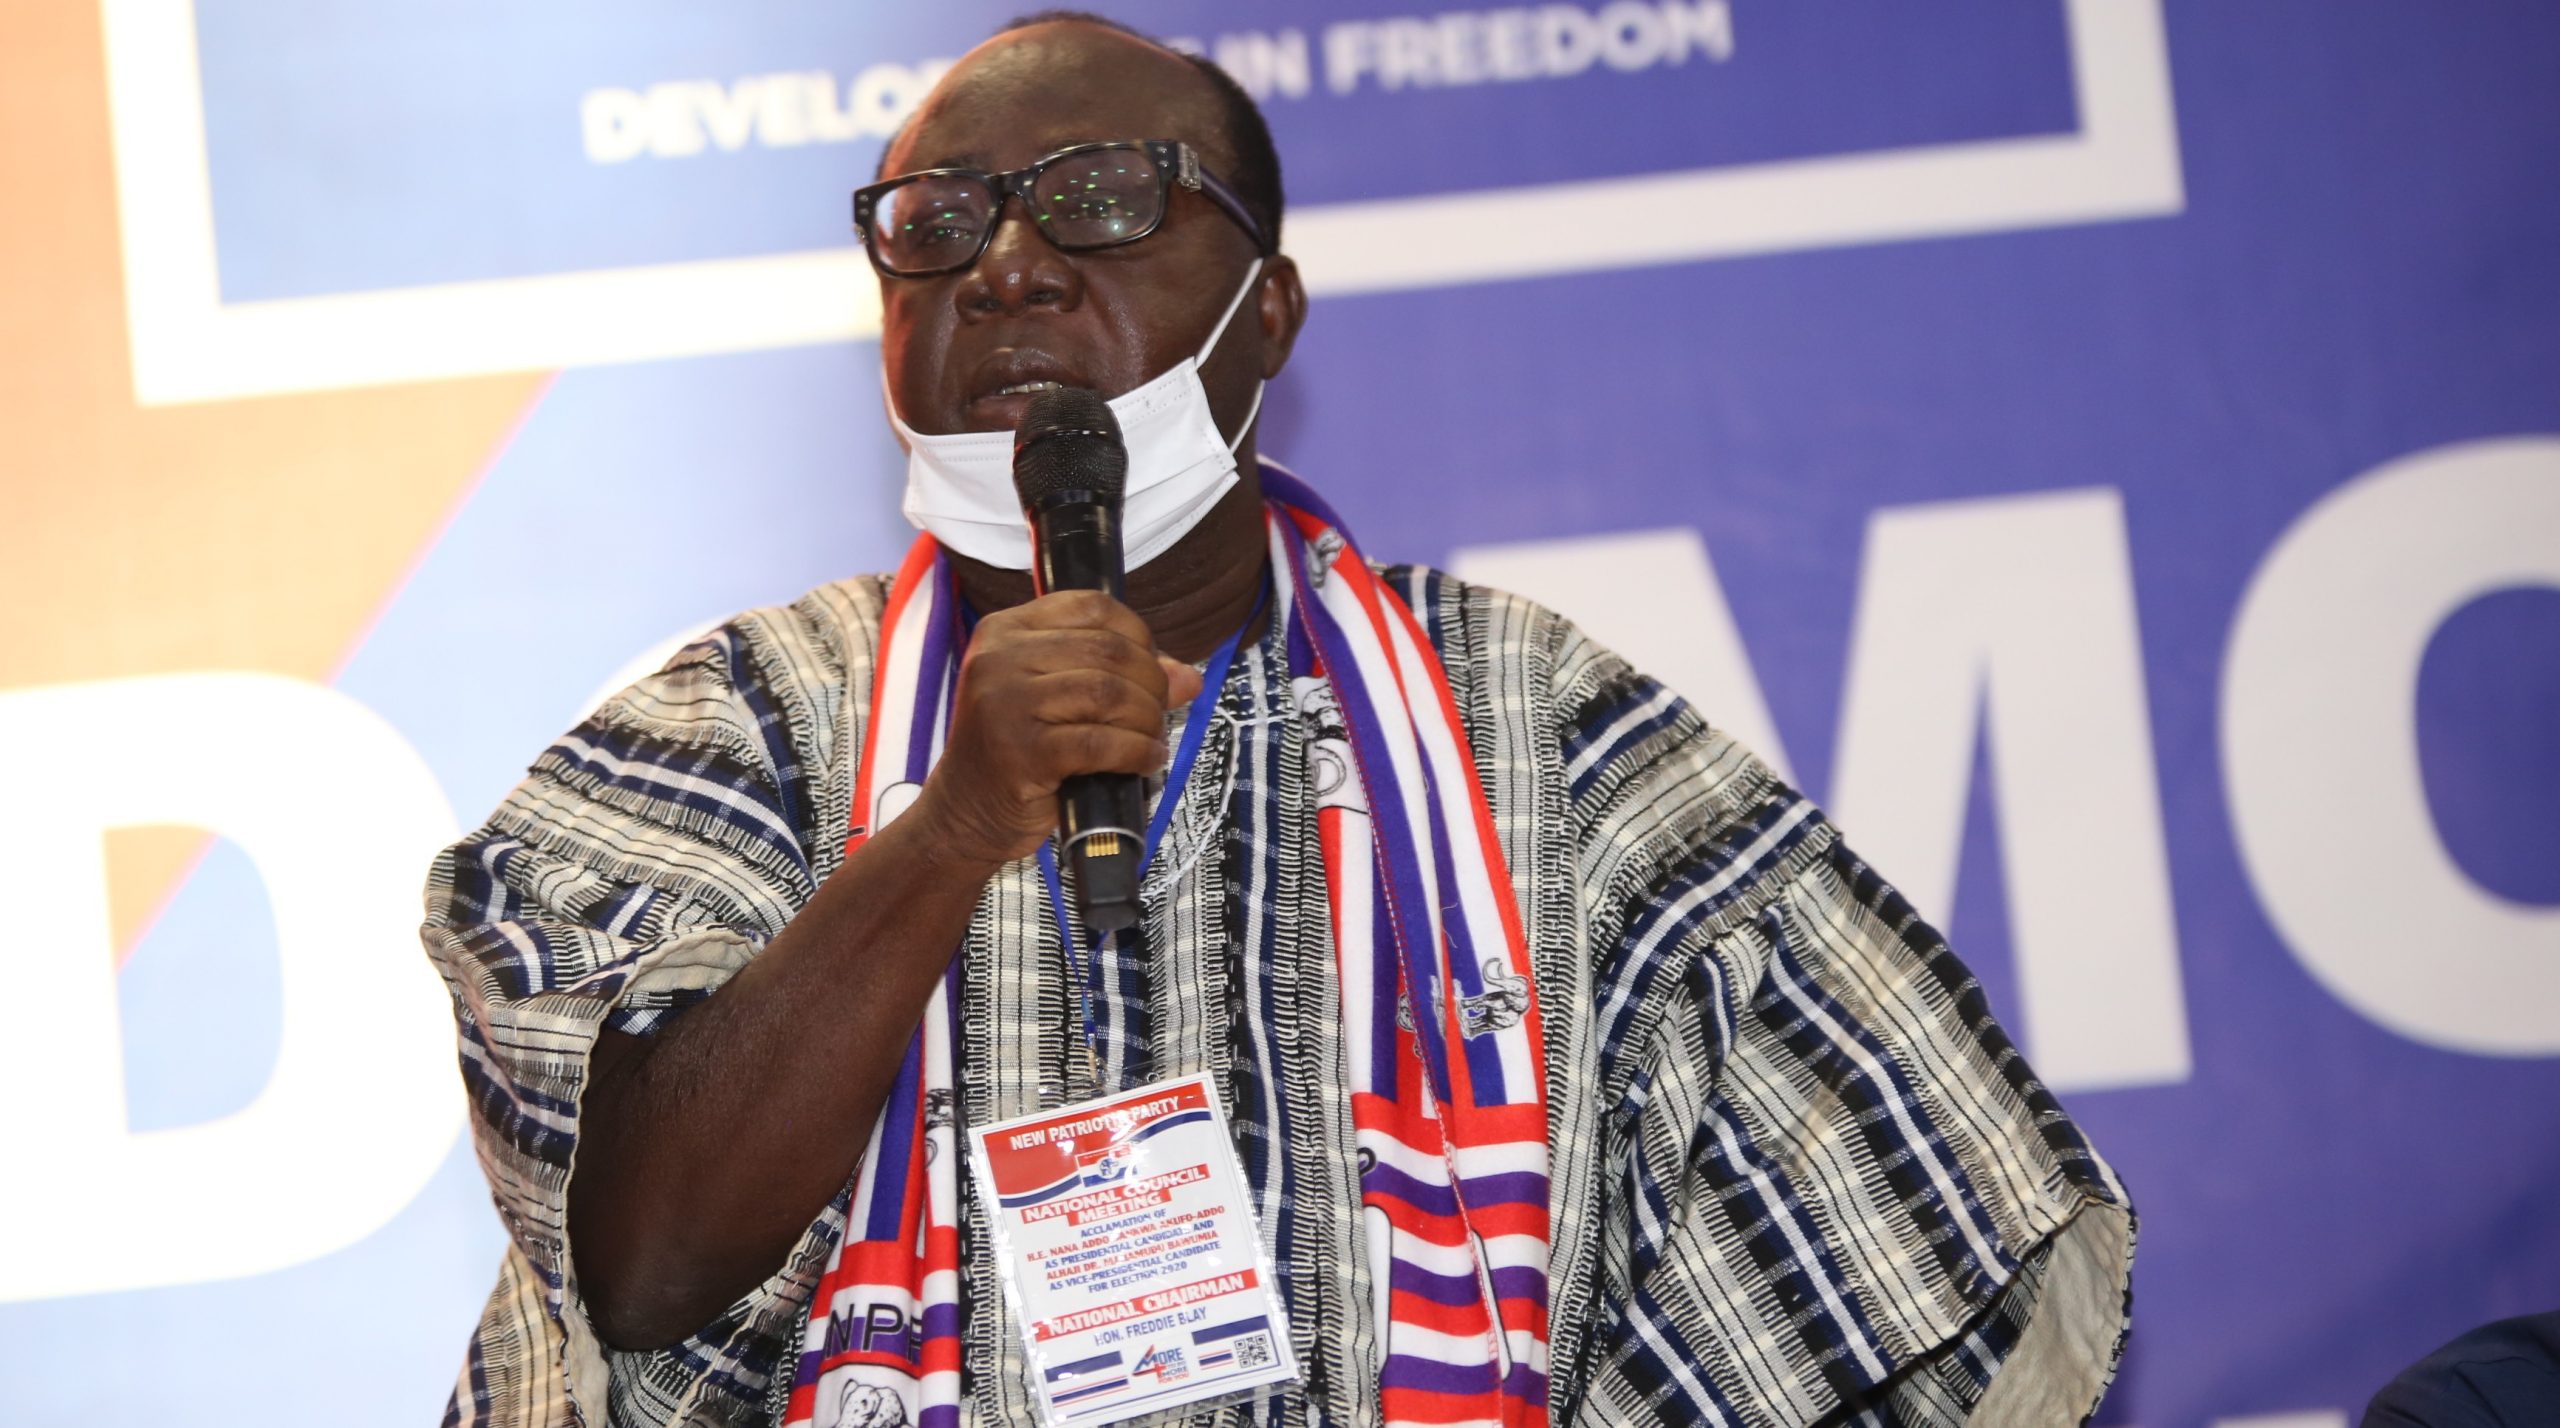 NPP firebrand crucifies Mahama's "thirst for power" in fiery letter